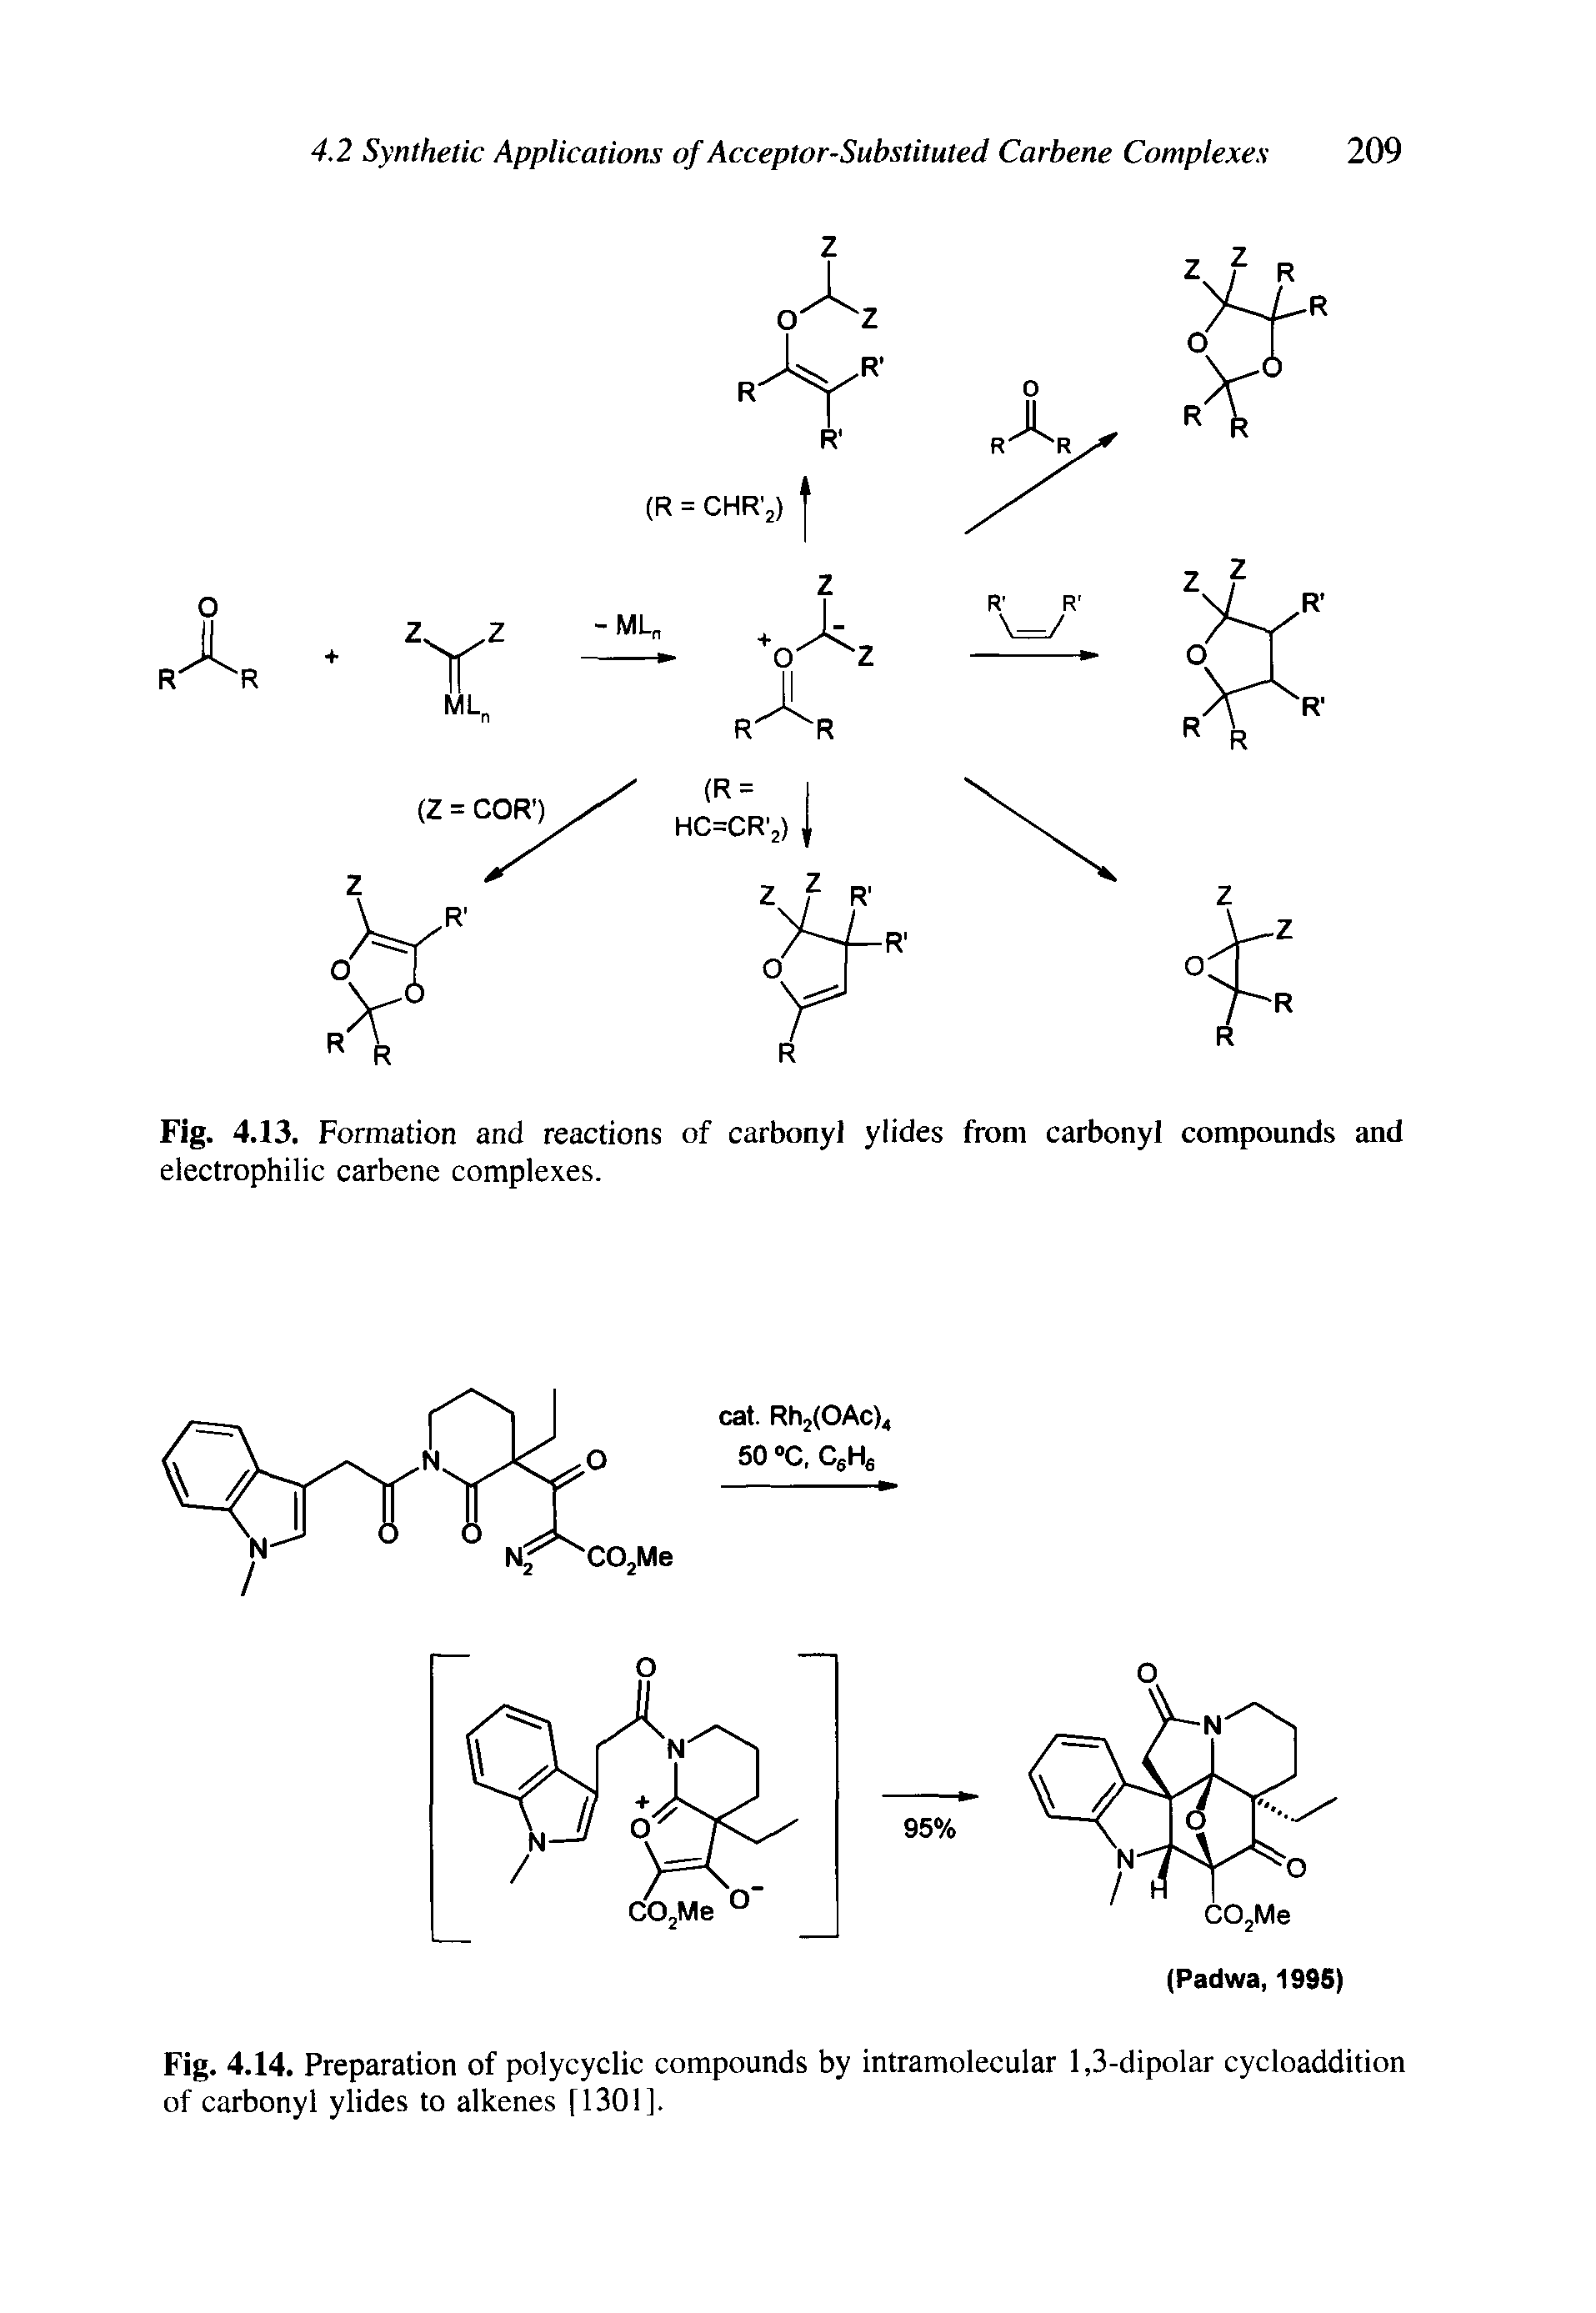 Fig. 4.14. Preparation of polycyclic compounds by intramolecular 1,3-dipolar cycloaddition of carbonyl ylides to alkenes 11301].